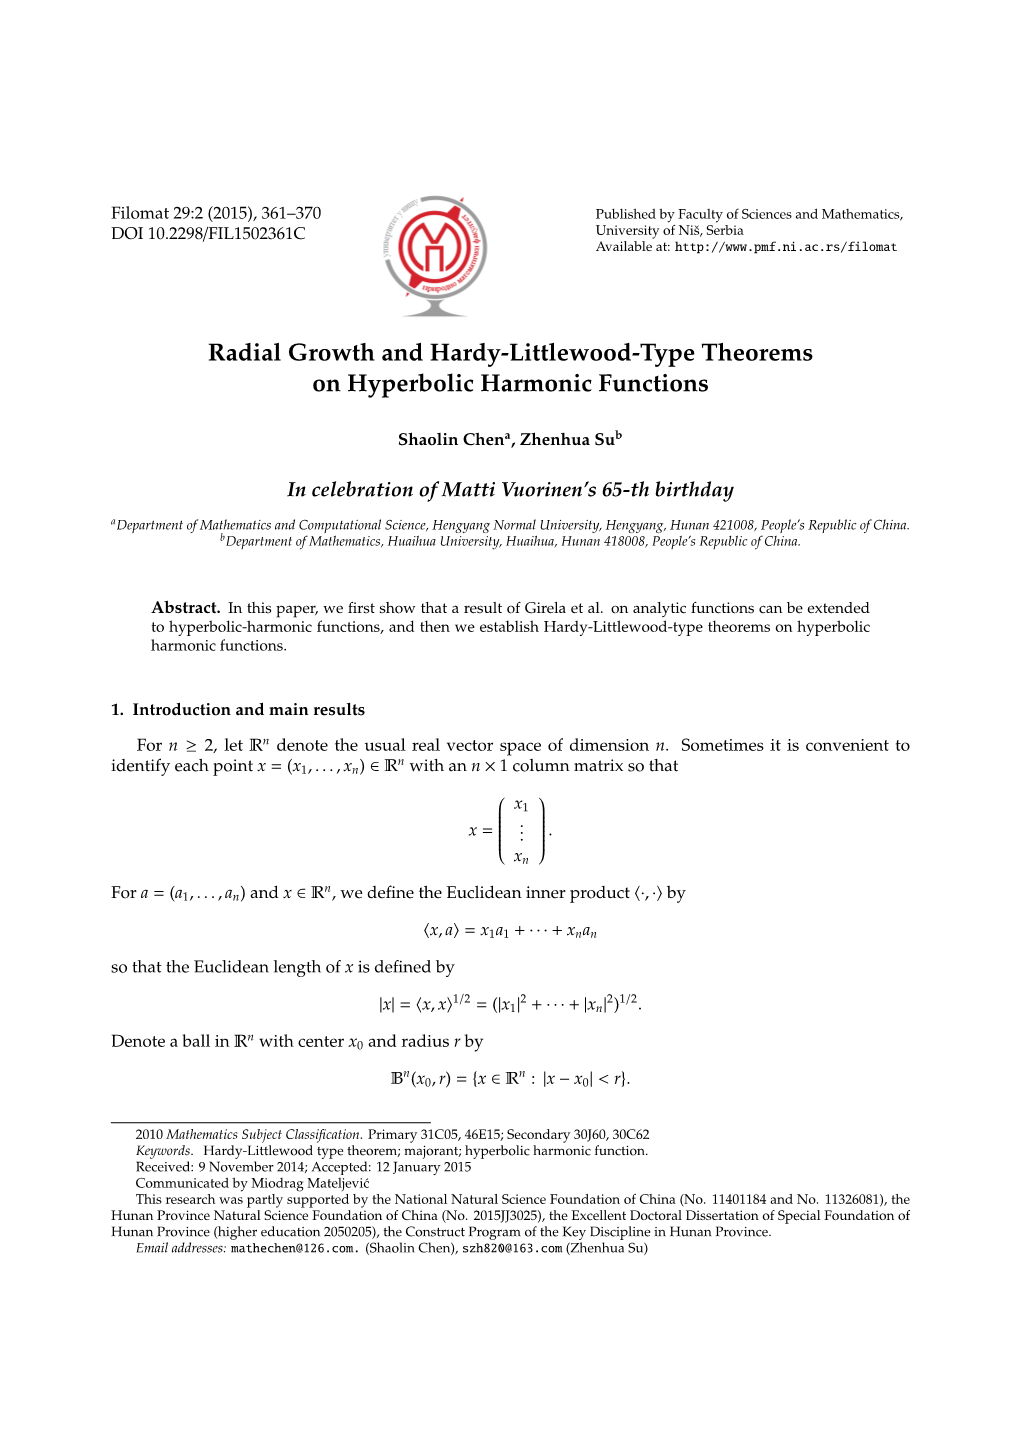 Radial Growth and Hardy-Littlewood-Type Theorems on Hyperbolic Harmonic Functions